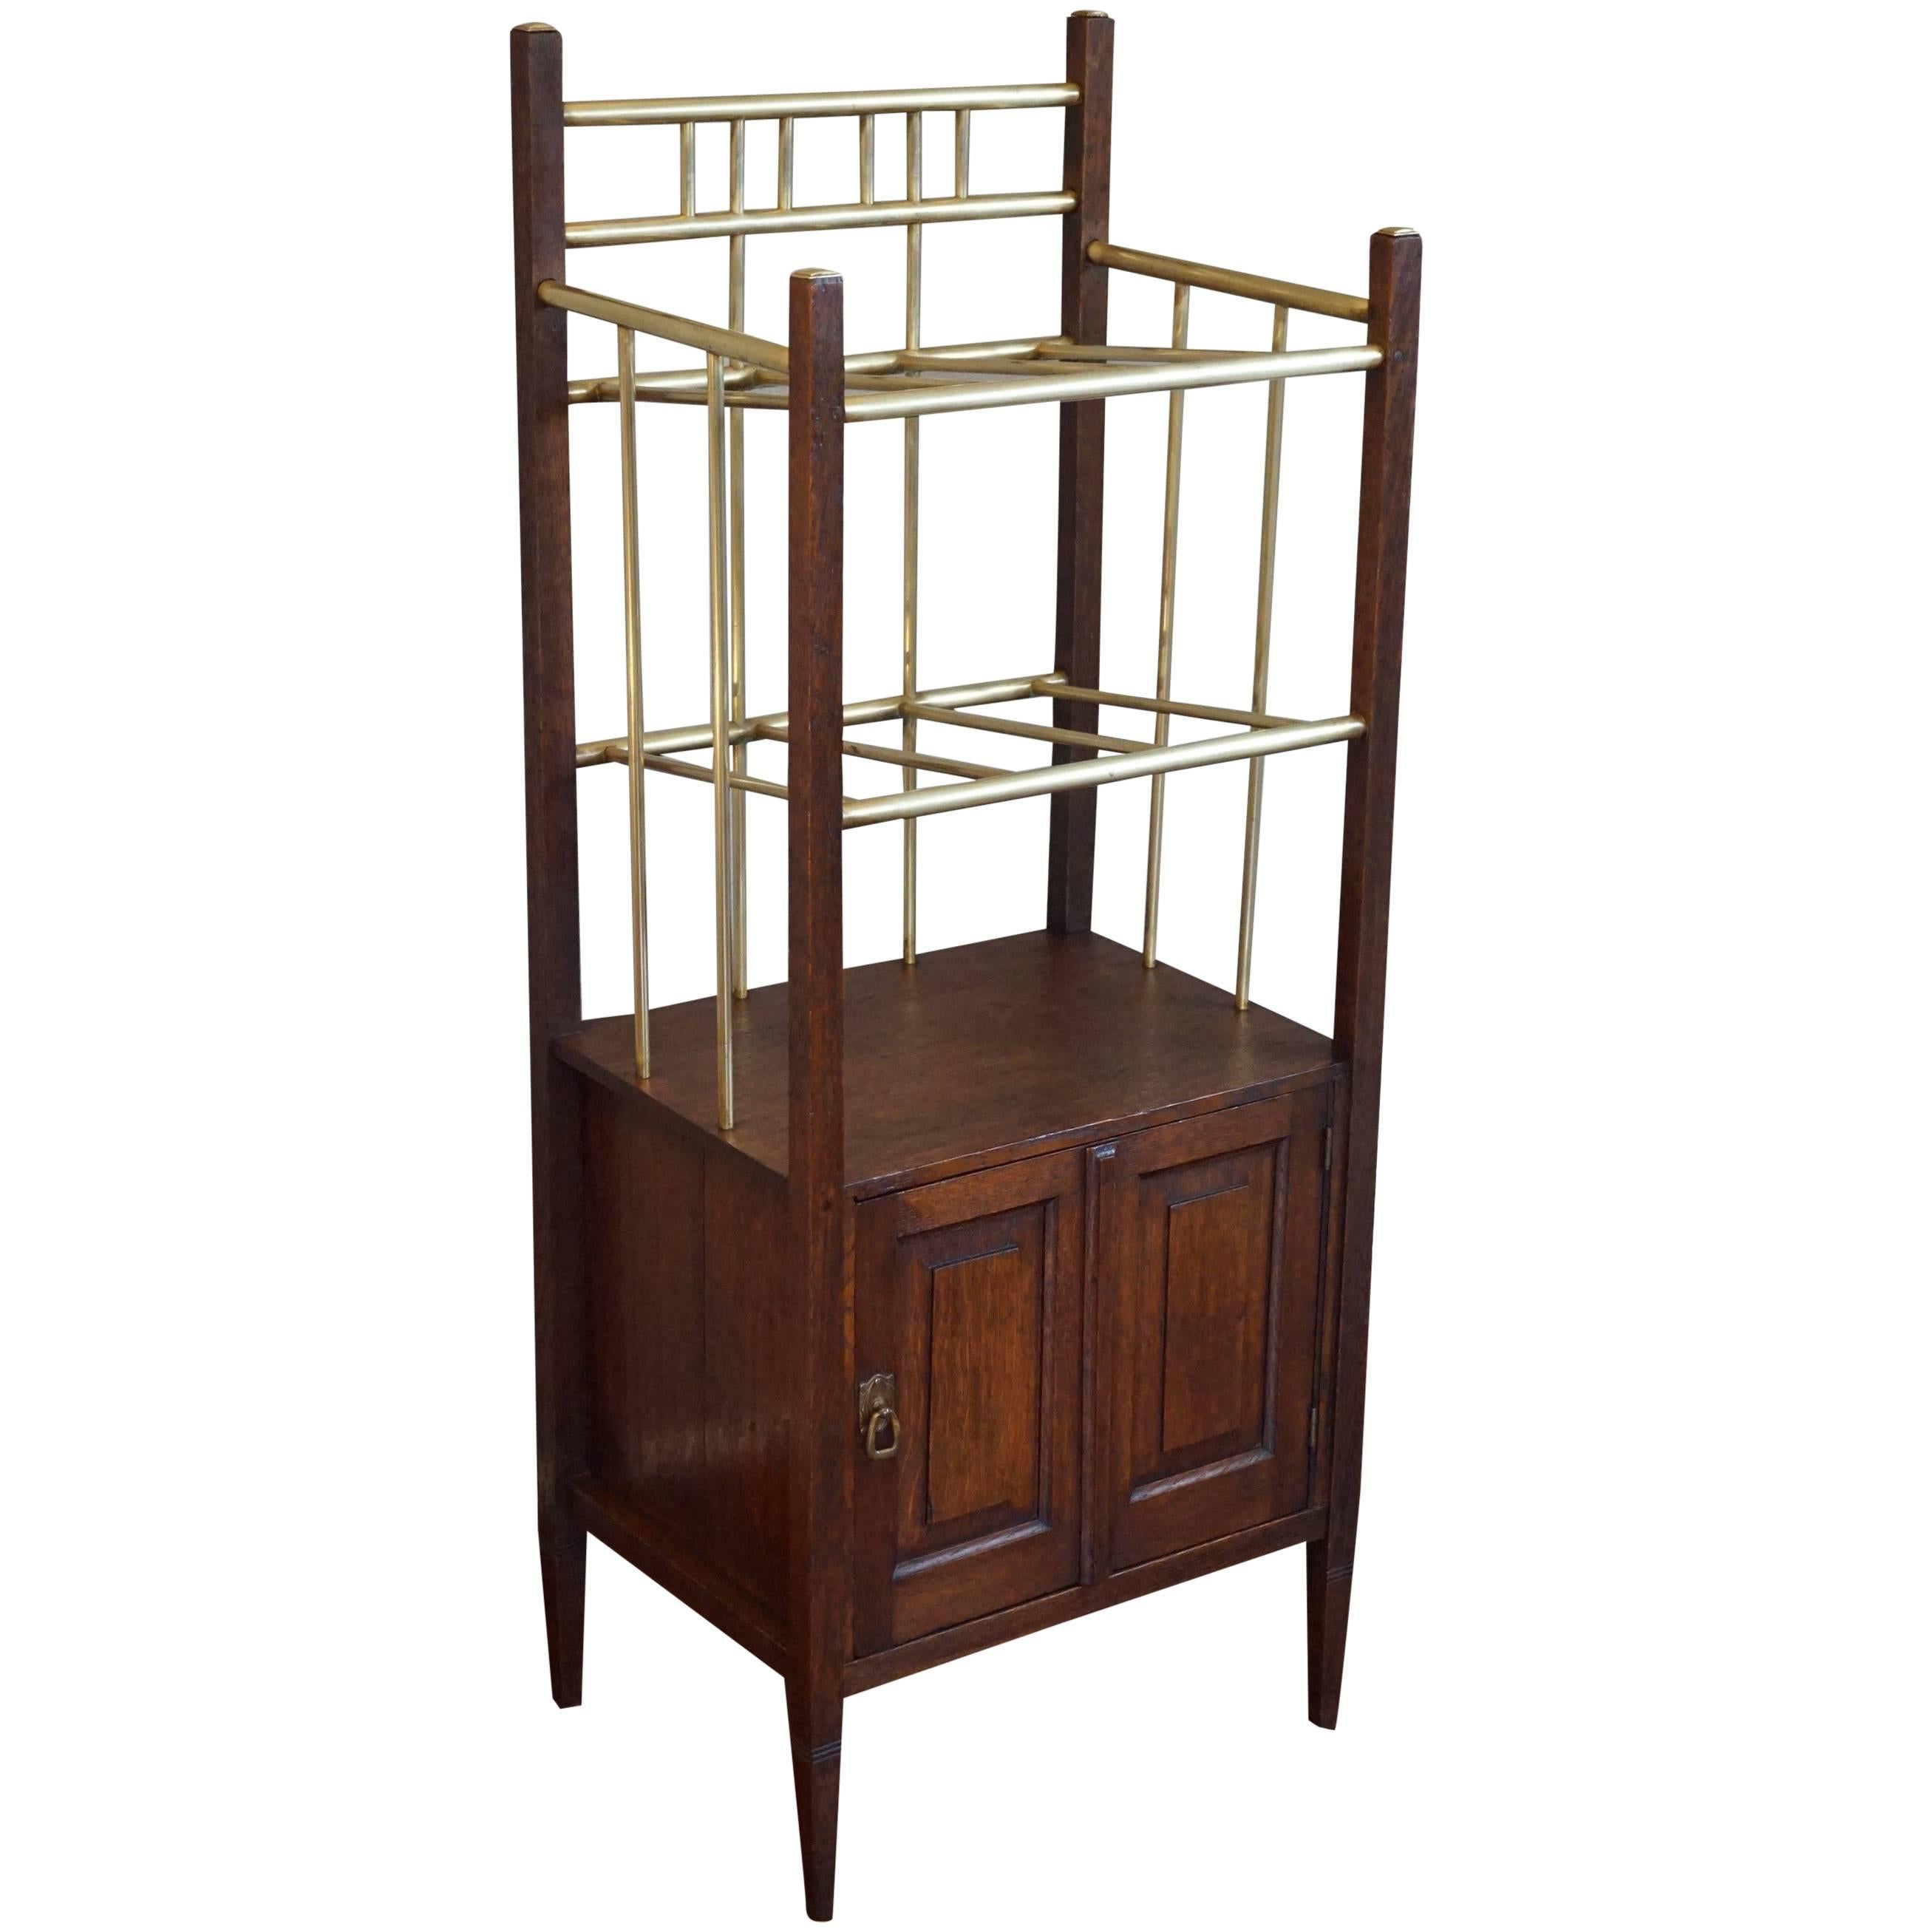 Arts & Crafts Oak and Polished Brass Magazine Stand with Cabinet from circa 1900